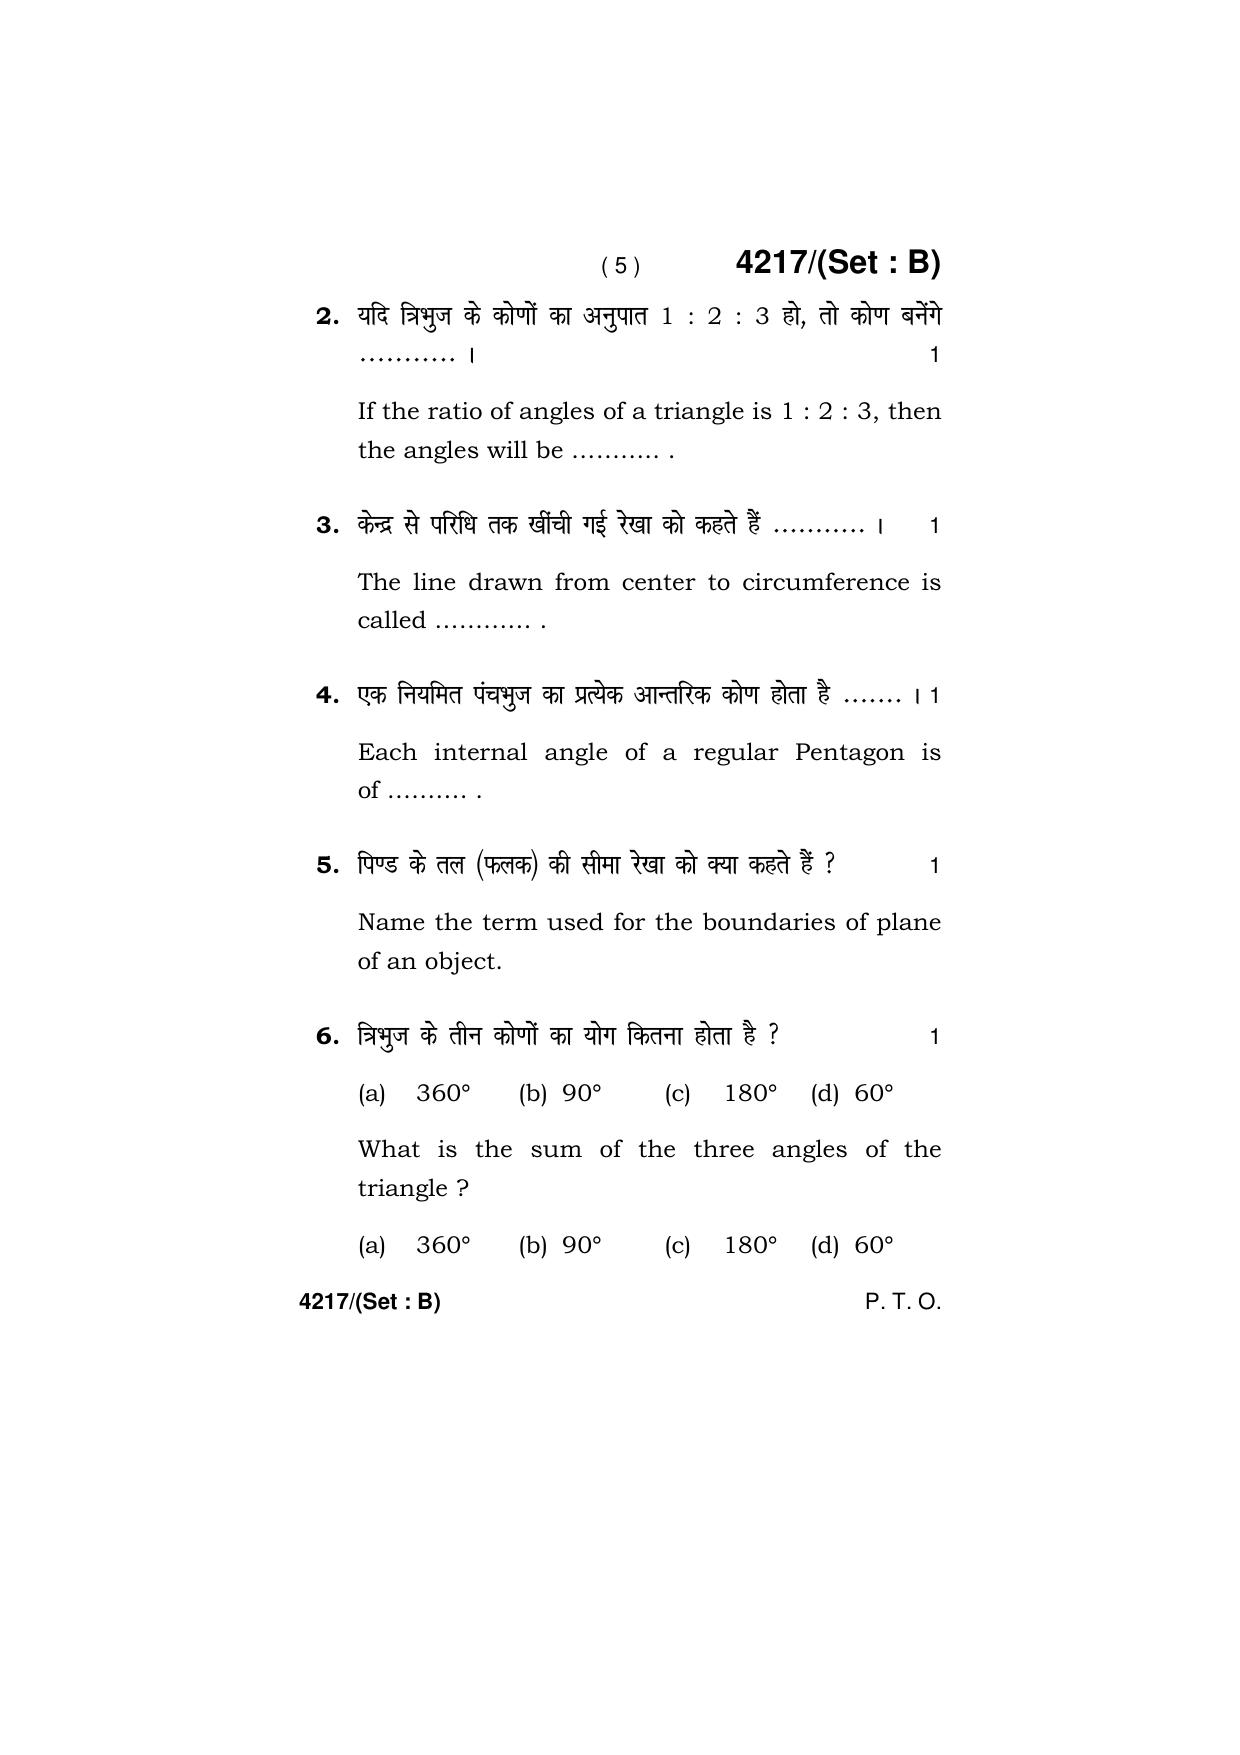 Haryana Board HBSE Class 10 Drawing (All Set) 2019 Question Paper - Page 13